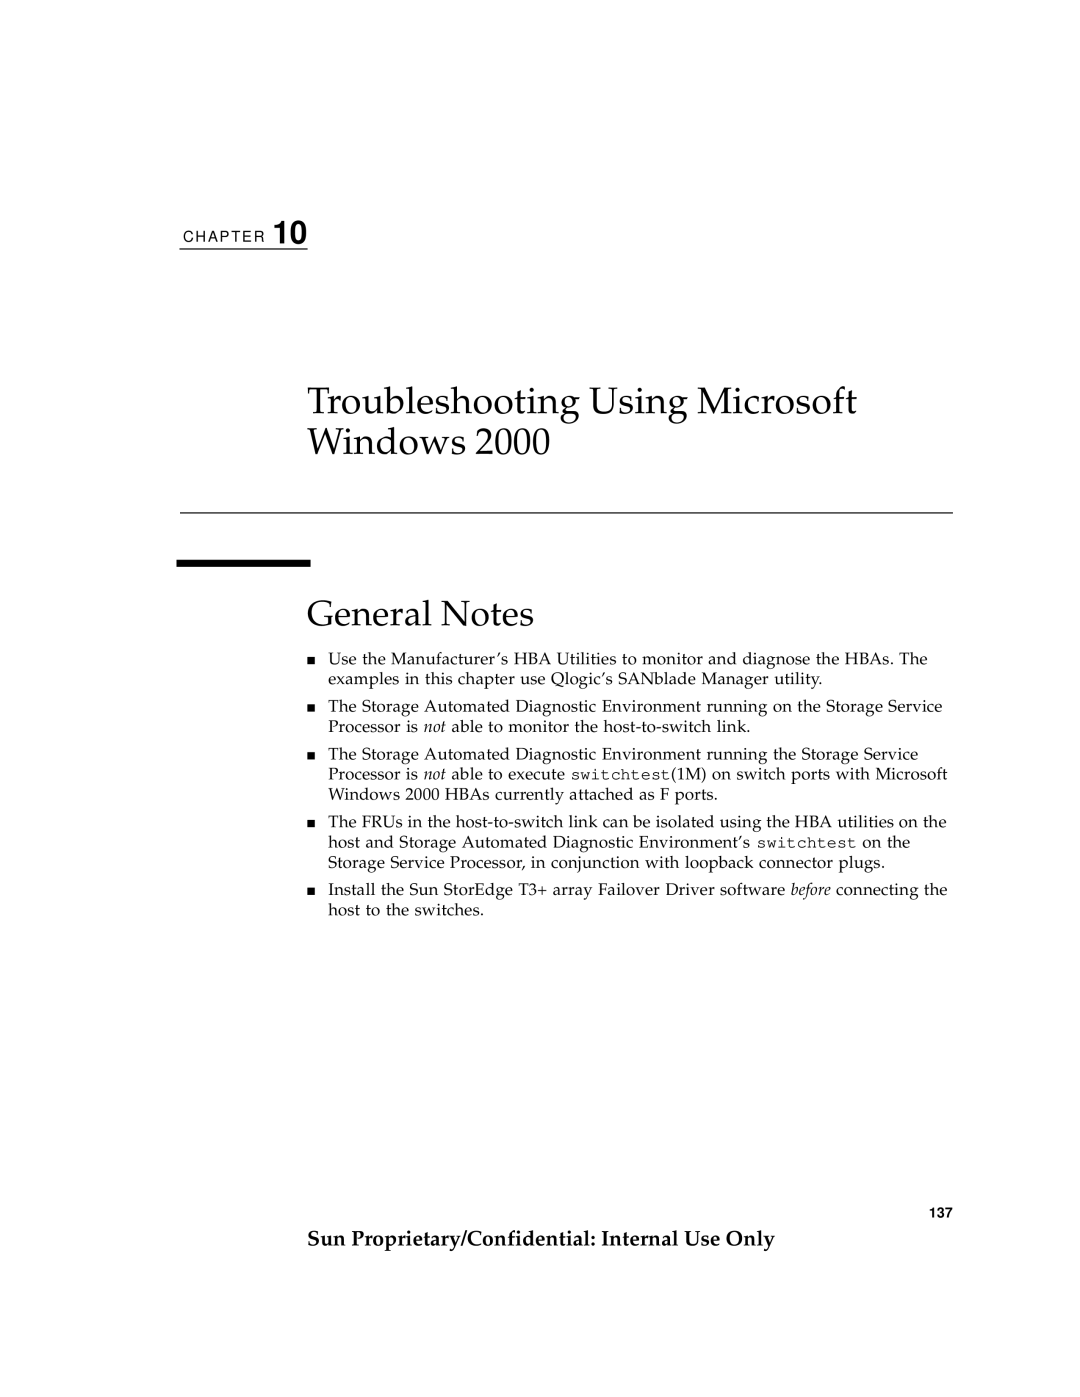 Sun Microsystems 6900, 3900 manual Troubleshooting Using Microsoft Windows, General Notes 